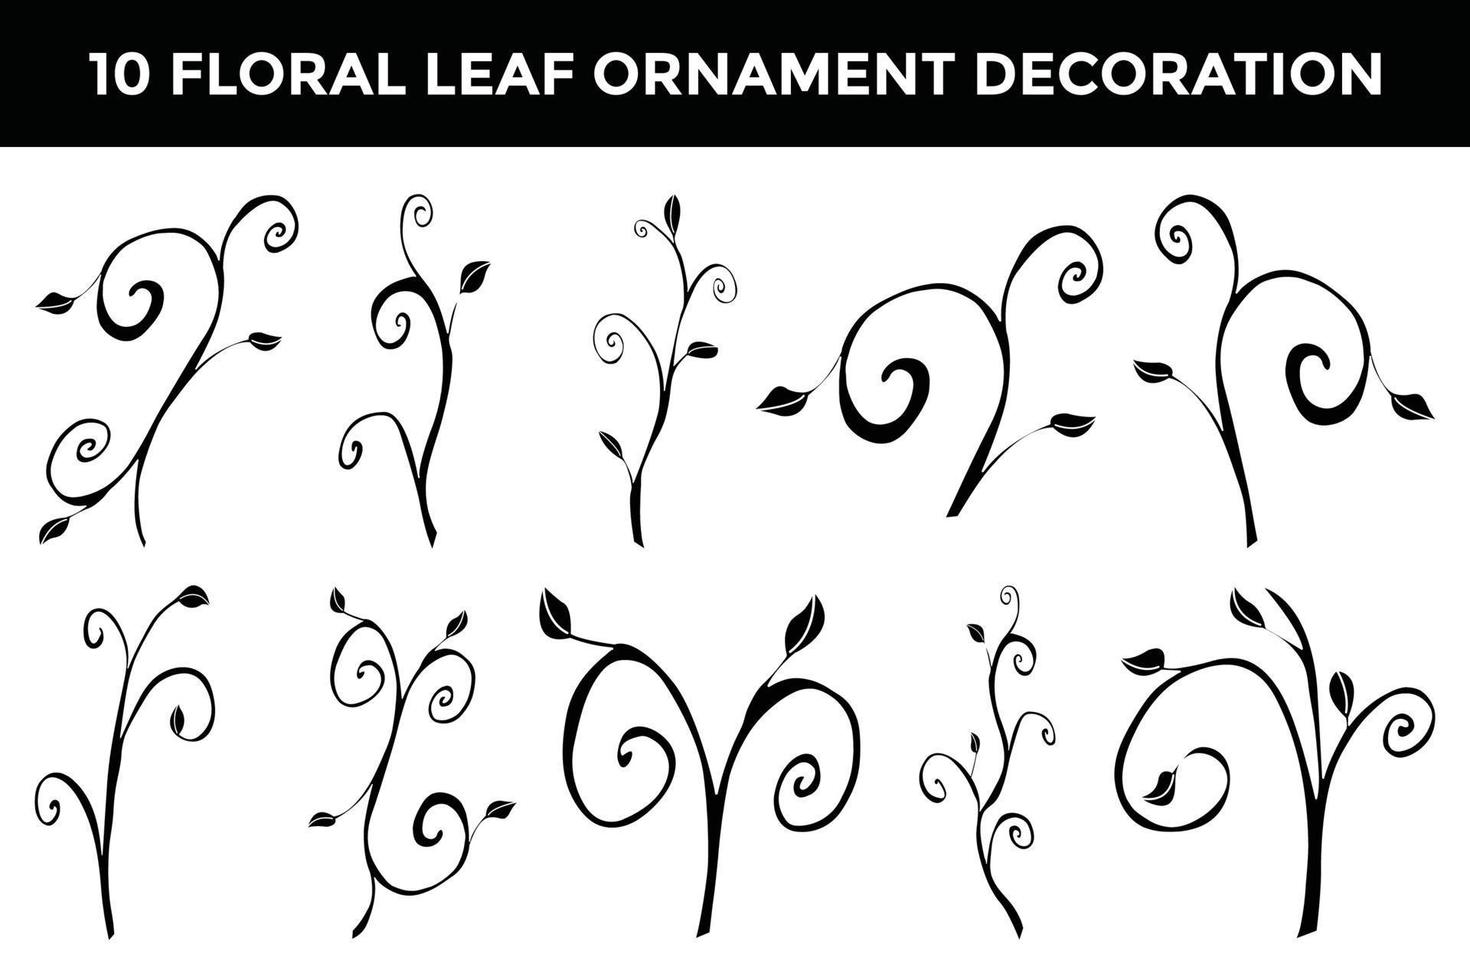 Floral leaf silhouette black and white ornament decoration collection vector